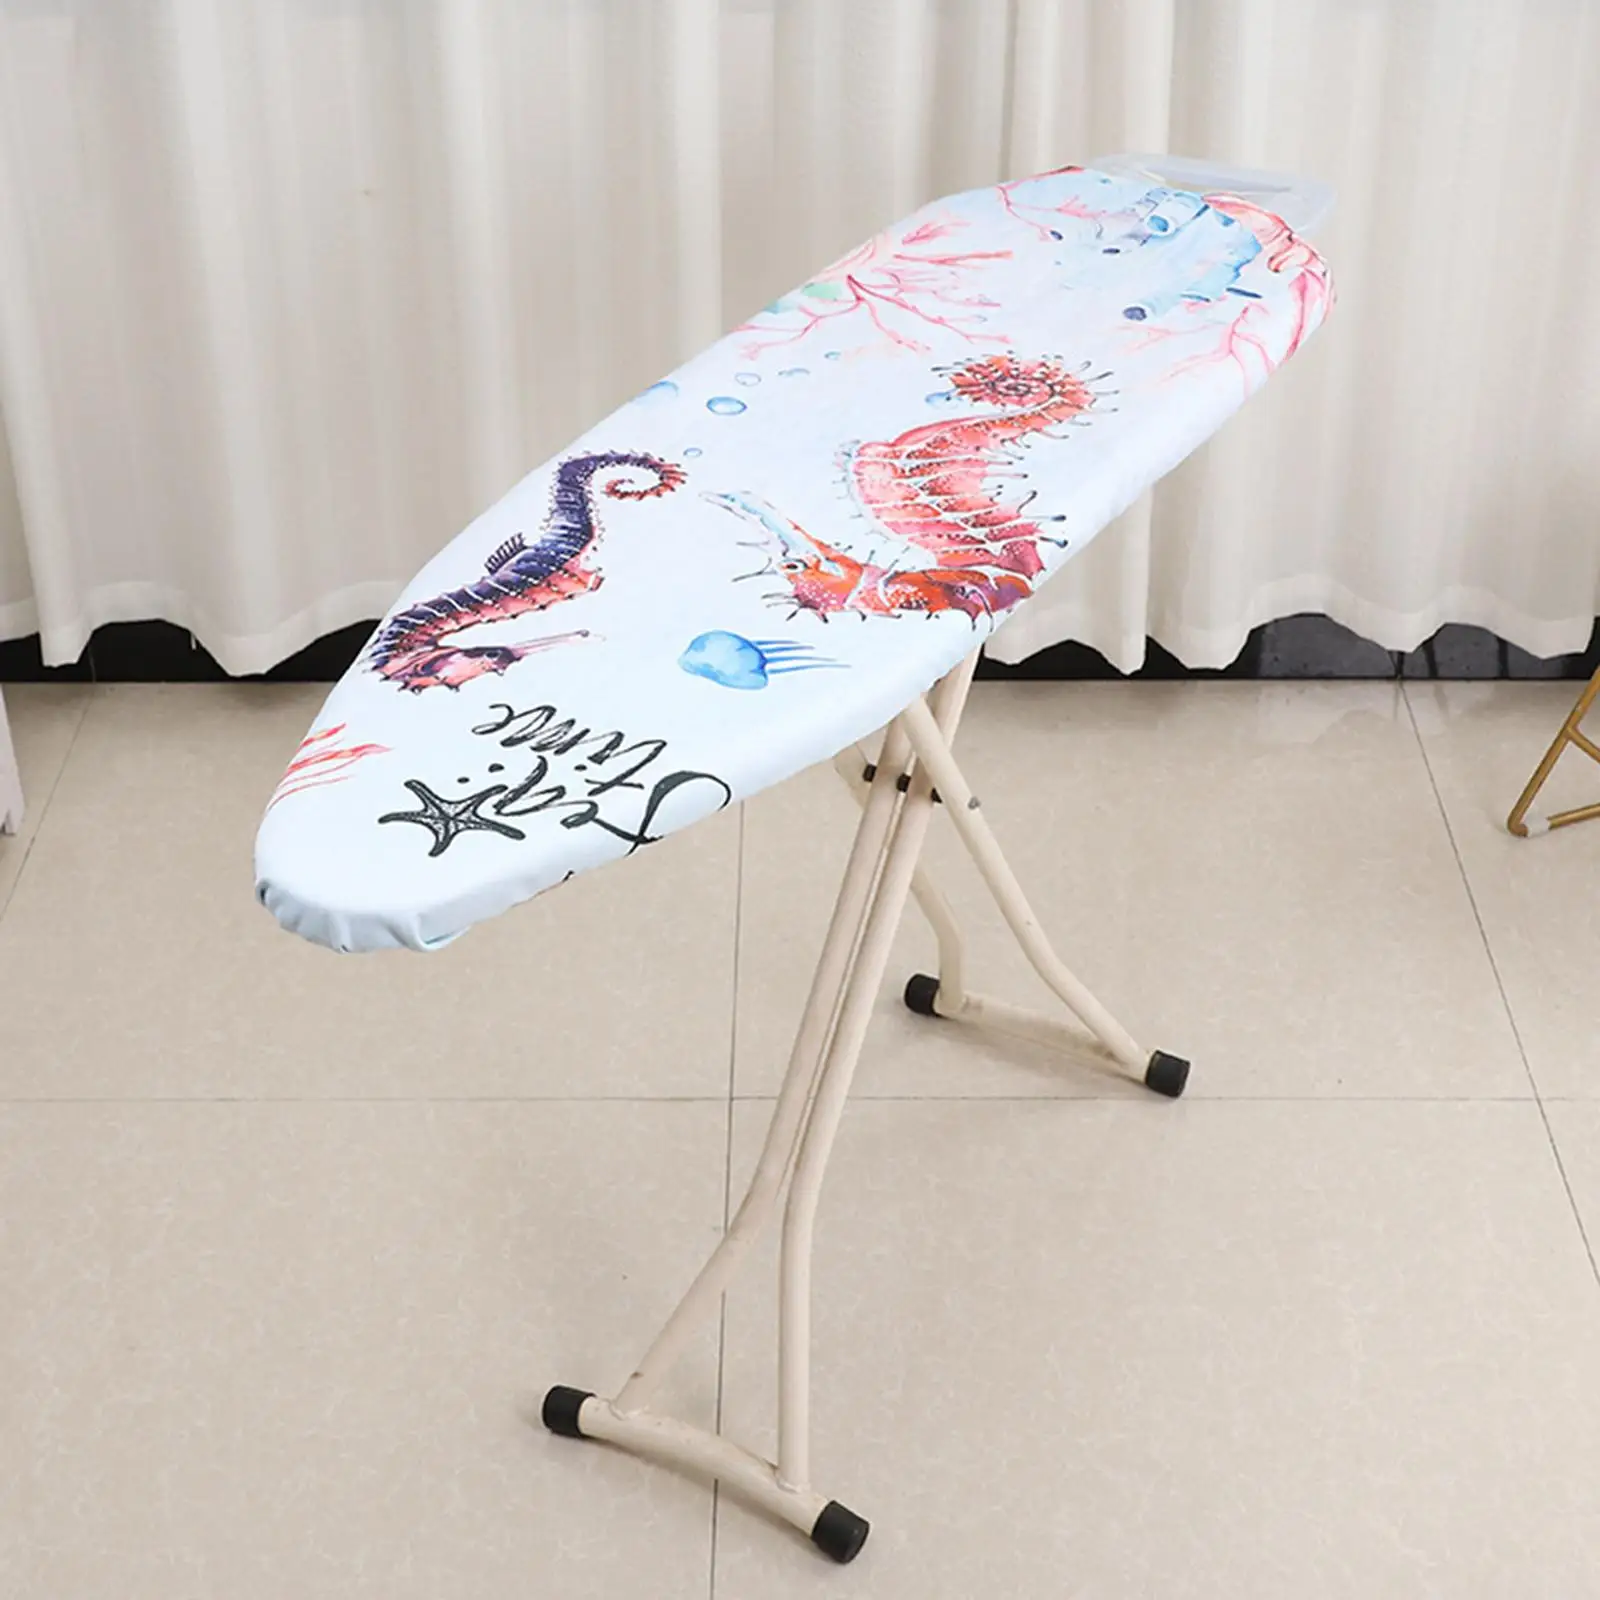 Durable Ironing Board Padded Cover Heat Insulation 19x55in for Families